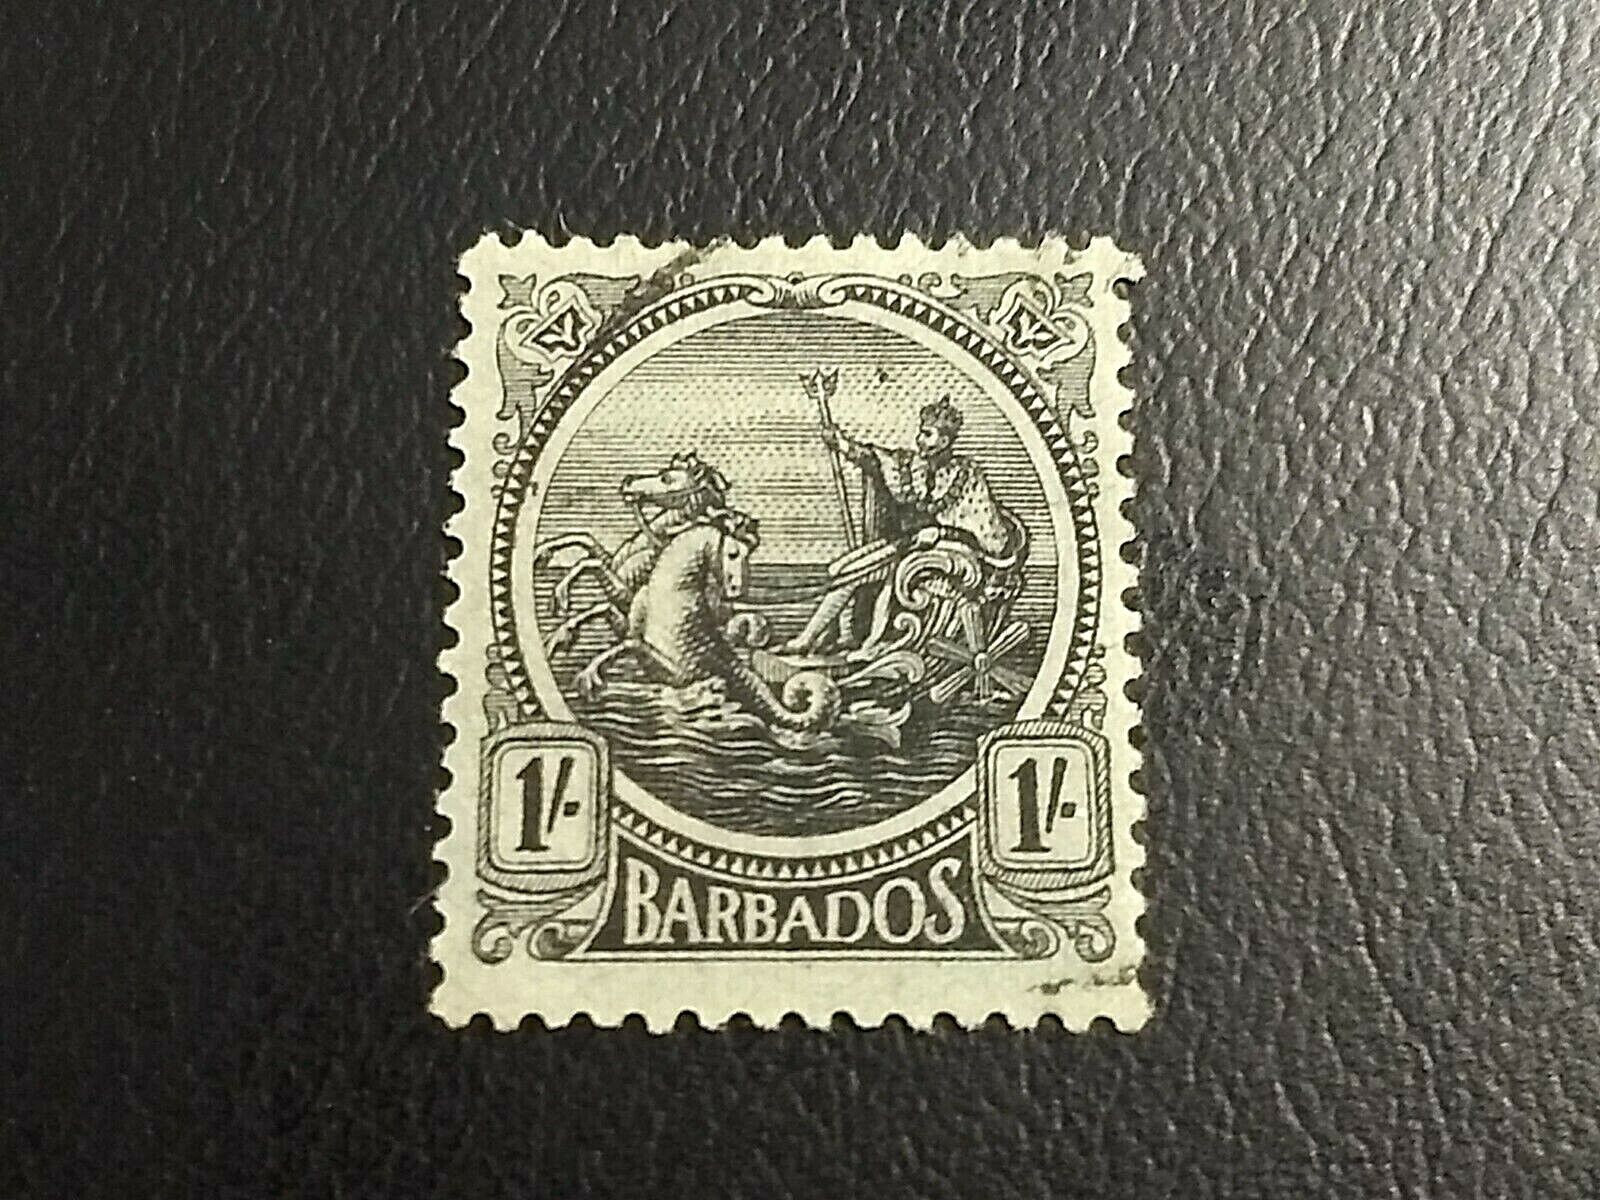 KAPPYSSTAMPS BARBADOS Special price for a Soldering limited time #164 1921 ONE VERY CAN SHILLING USED LIGHT